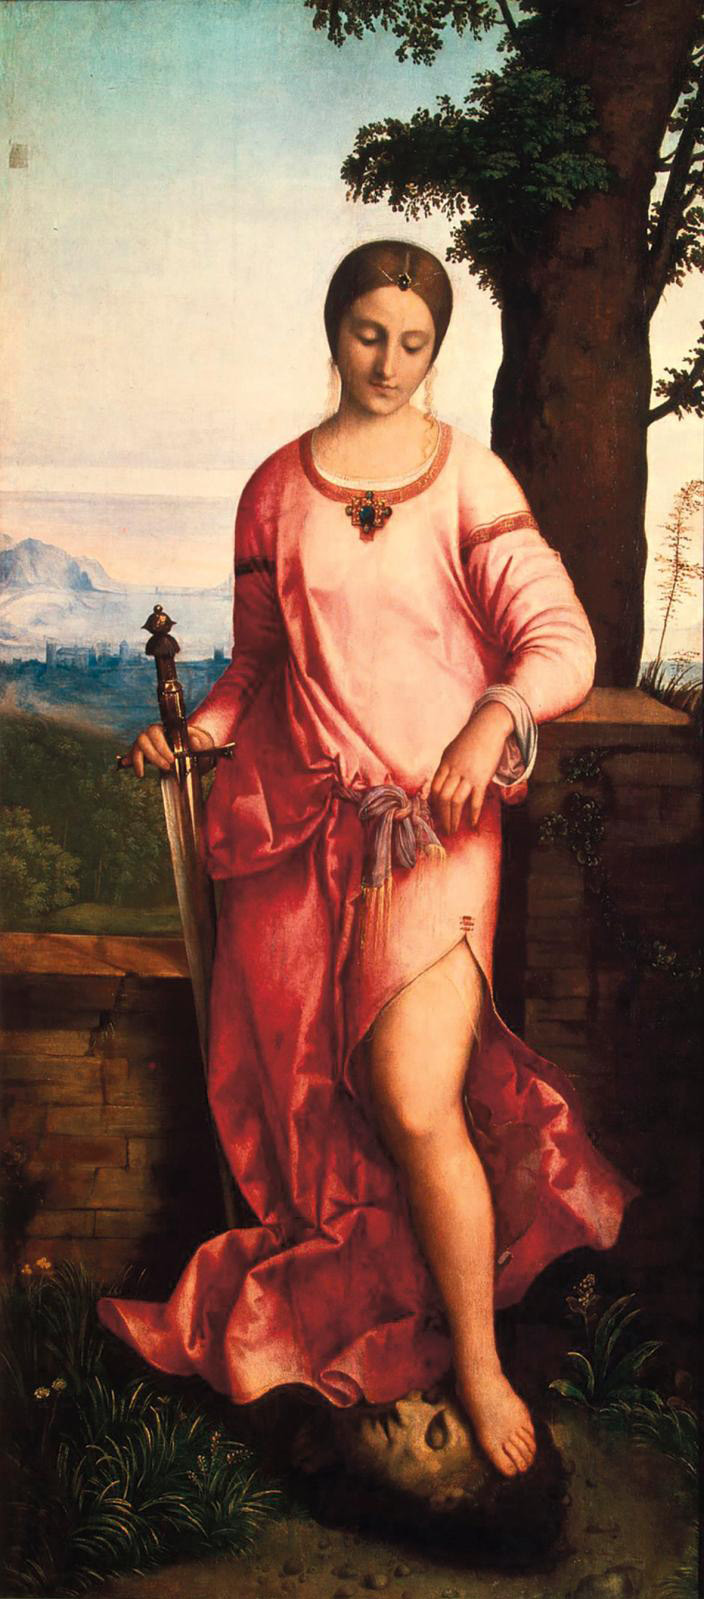 Judith by Giorgione (1477-1510) from the Hermitage, recently the subject of an NFT sold for the museum's benefit.© State Hermitage Museum,